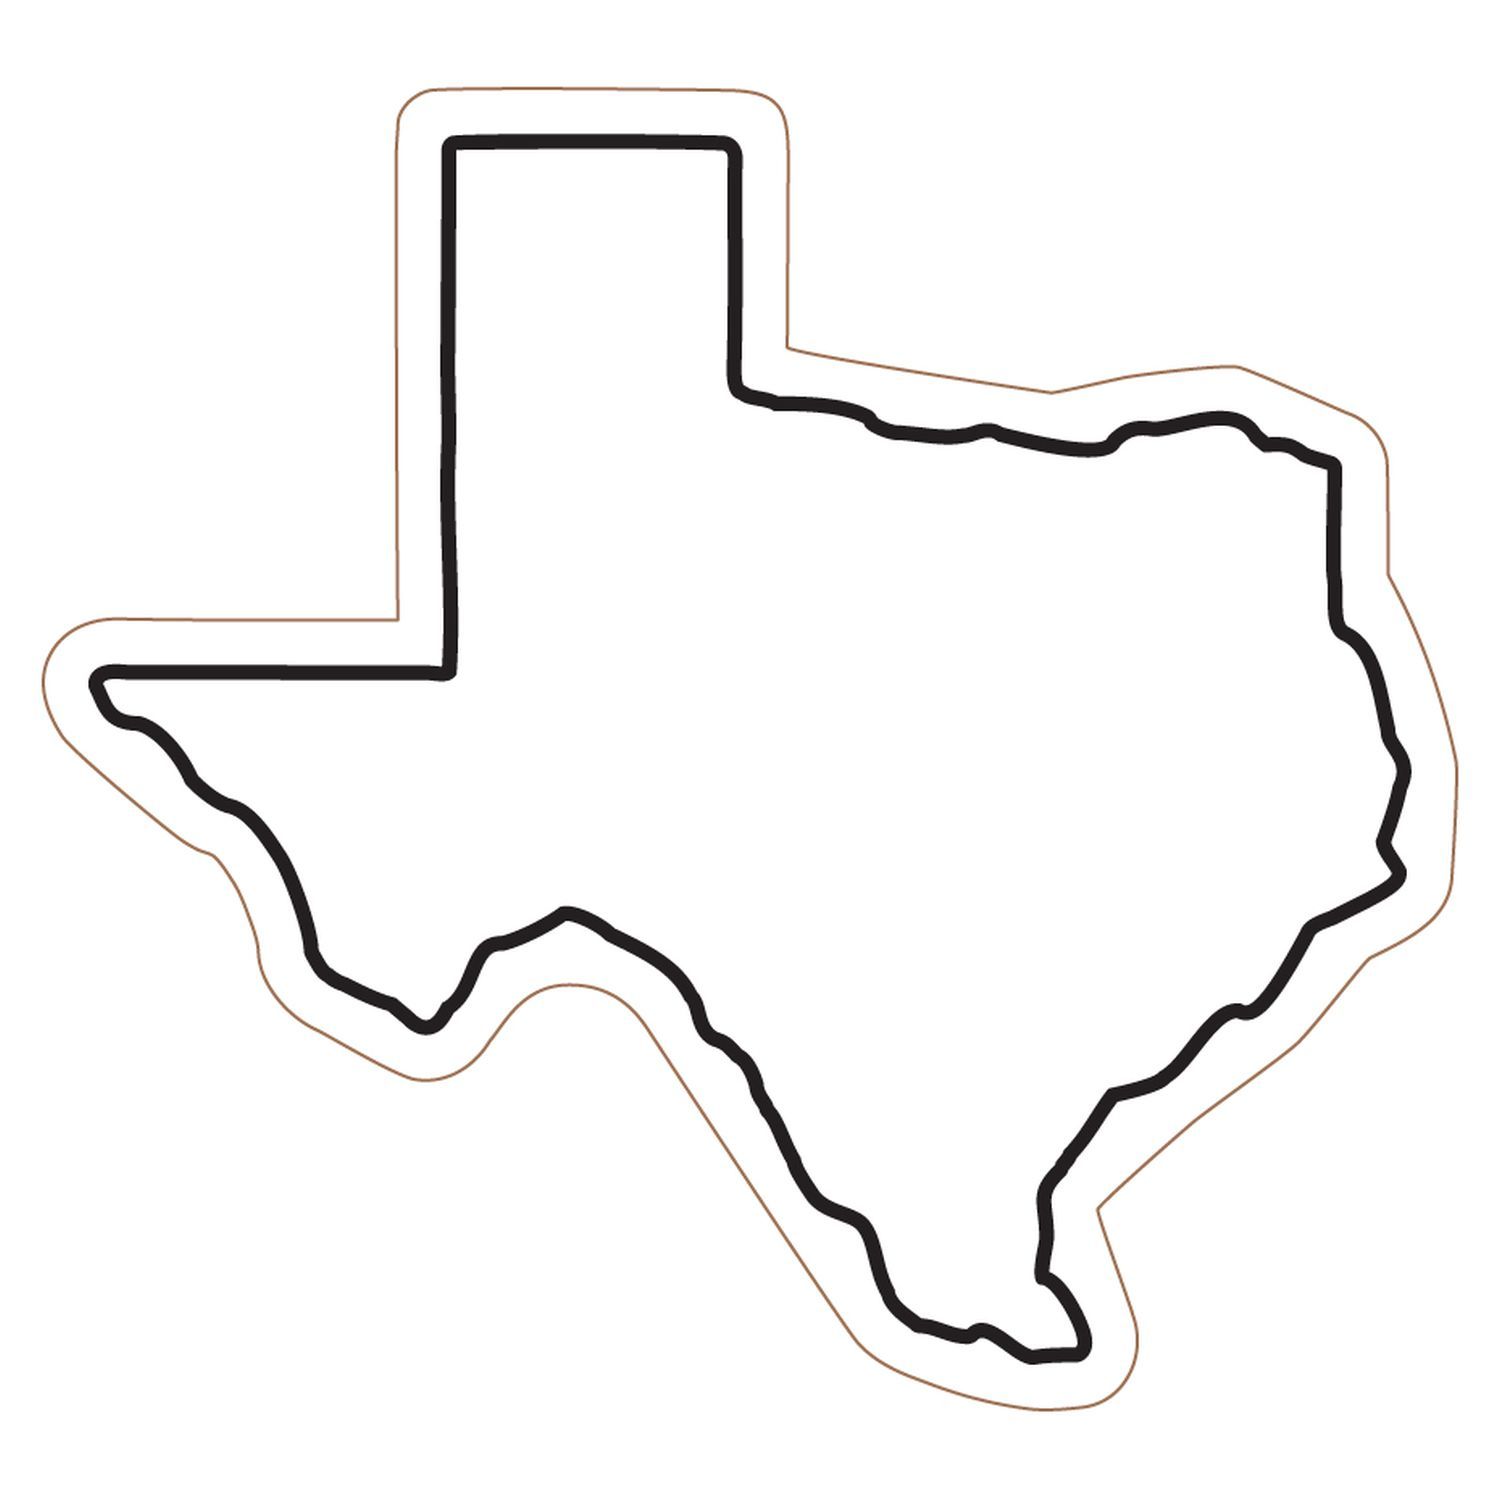 Texas State Clip Art. Outline - State Of Texas Clip Art